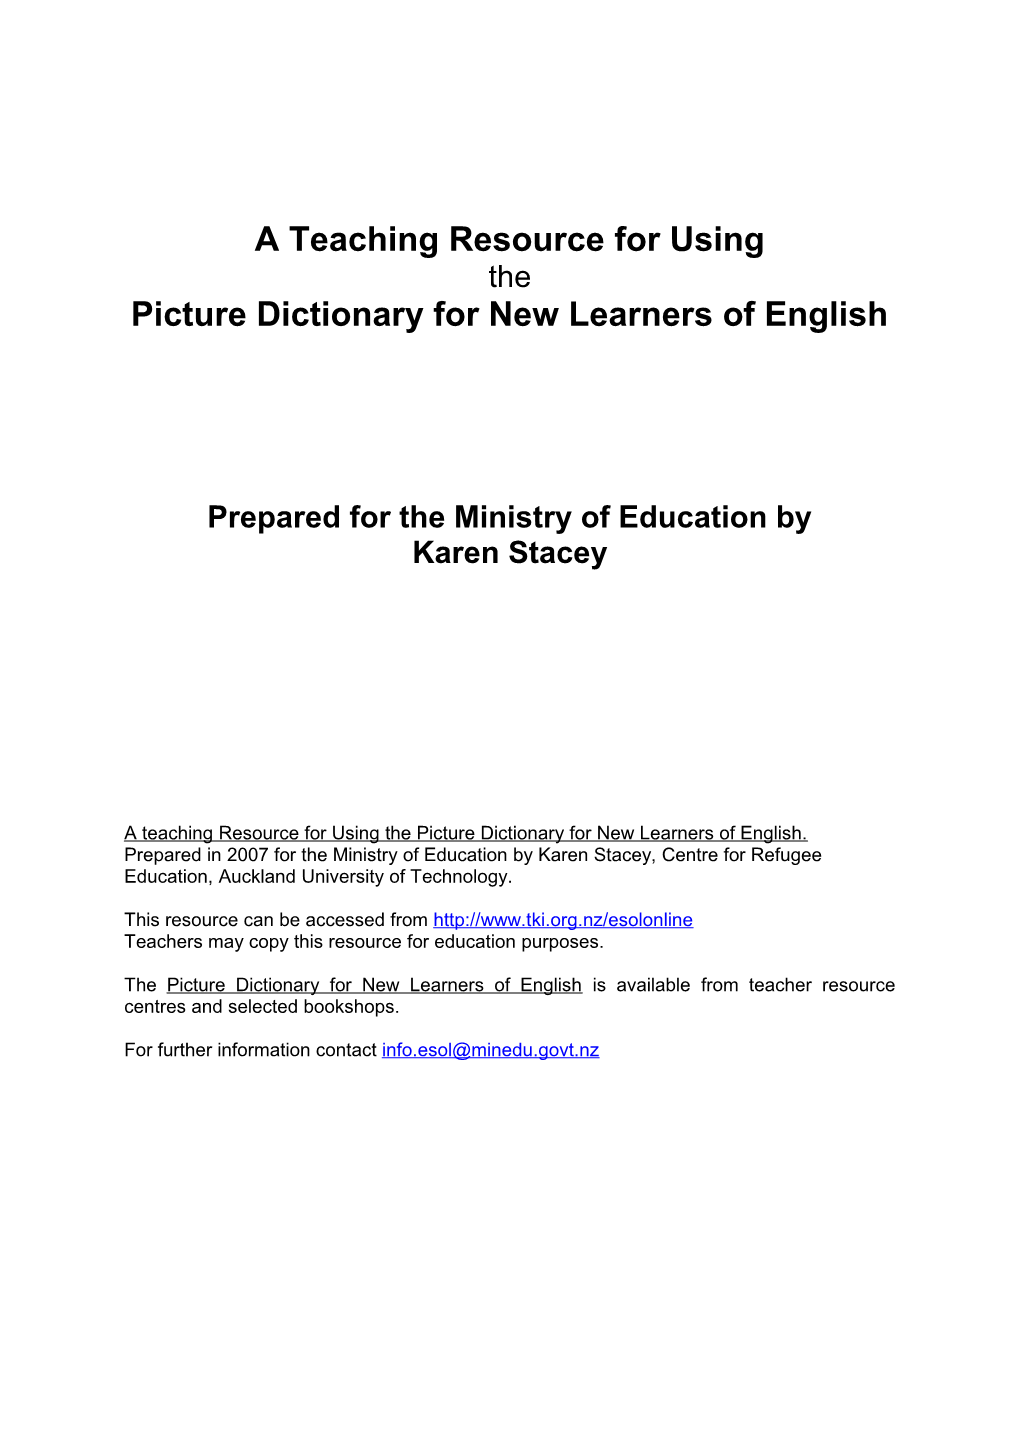 A Teaching Resource for Using